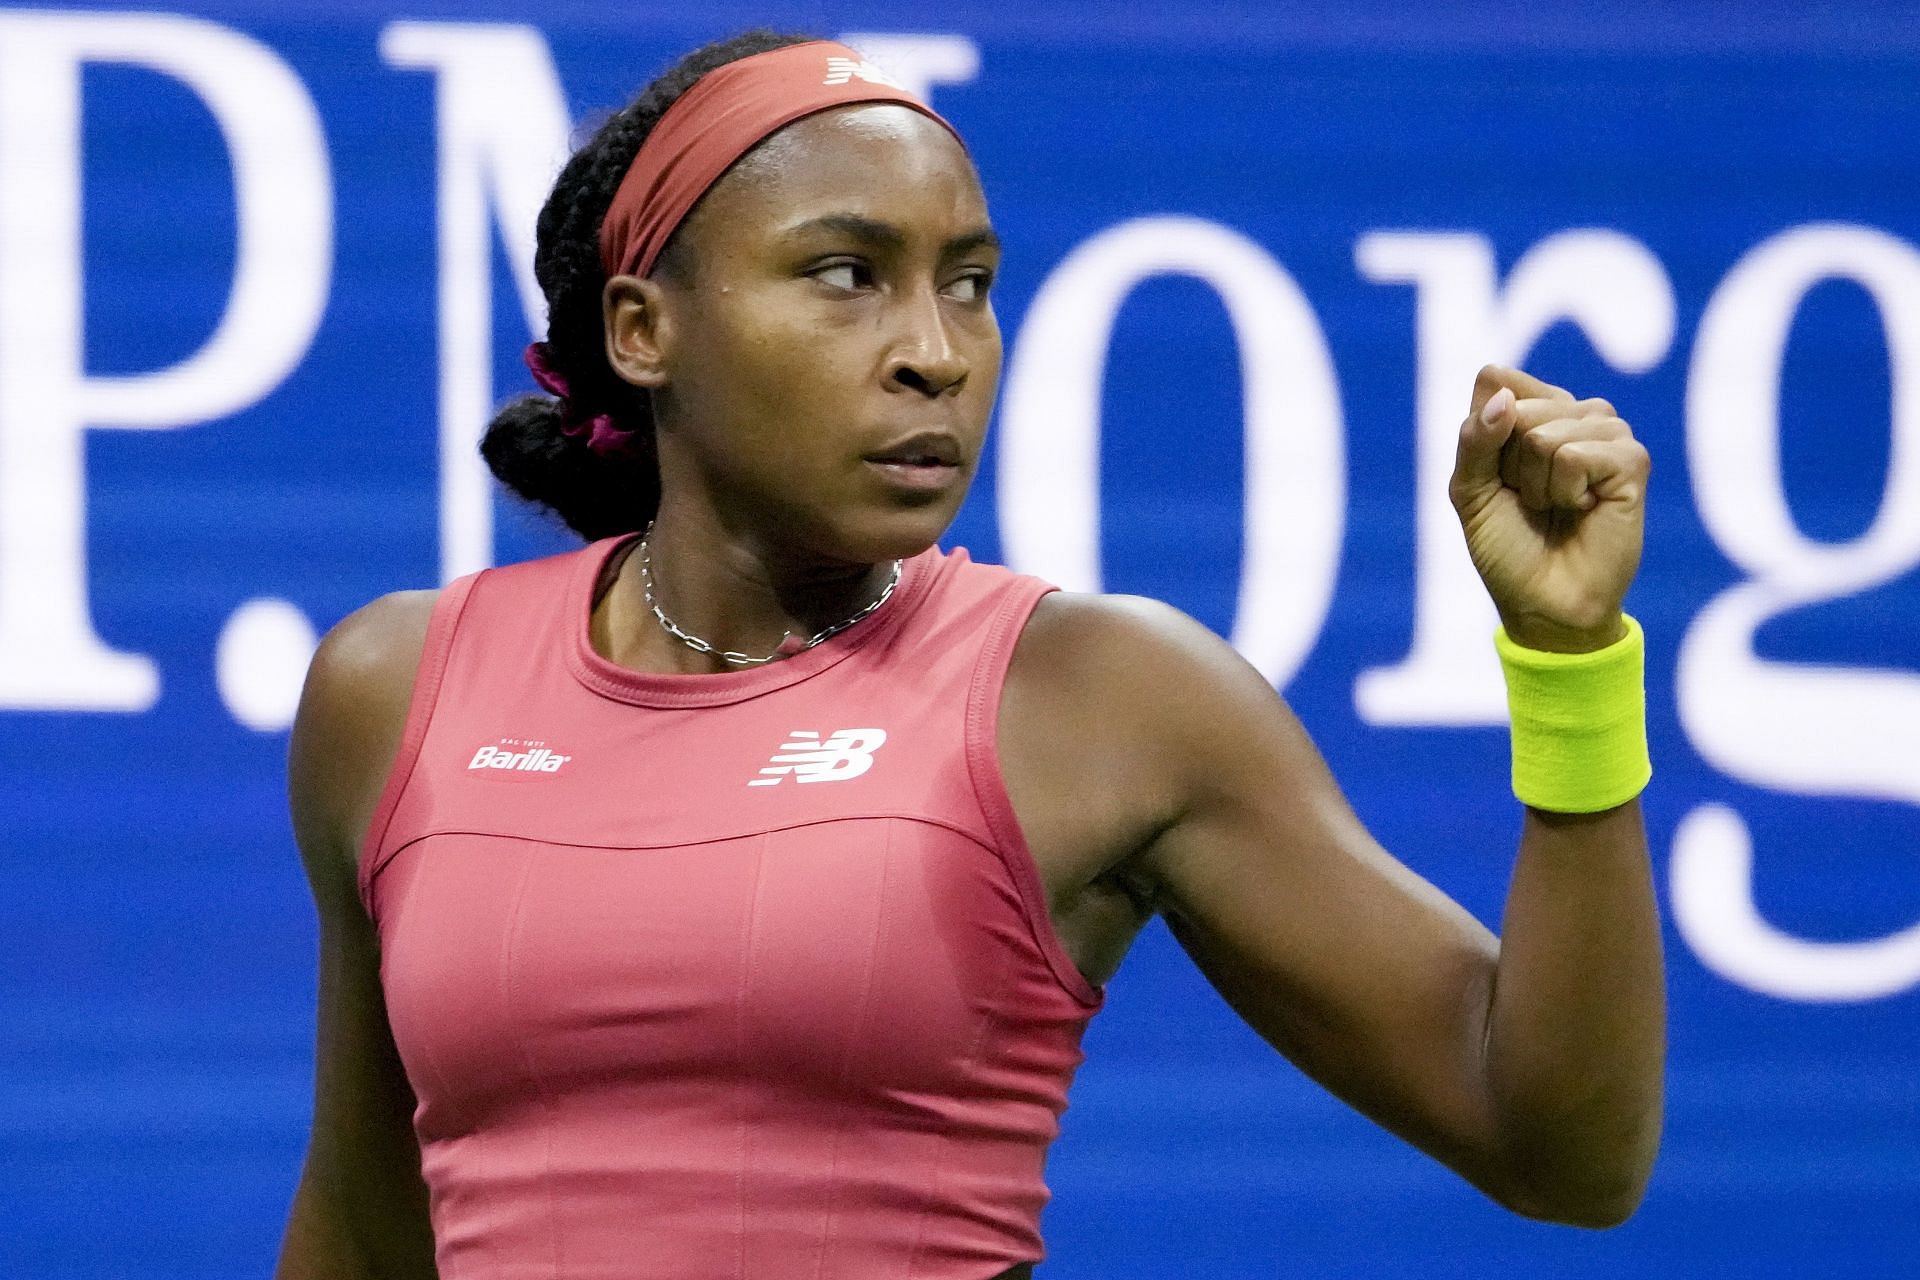 US Open 2023: Coco Gauff will rise to World No. 3 next week thanks to her title run in New York